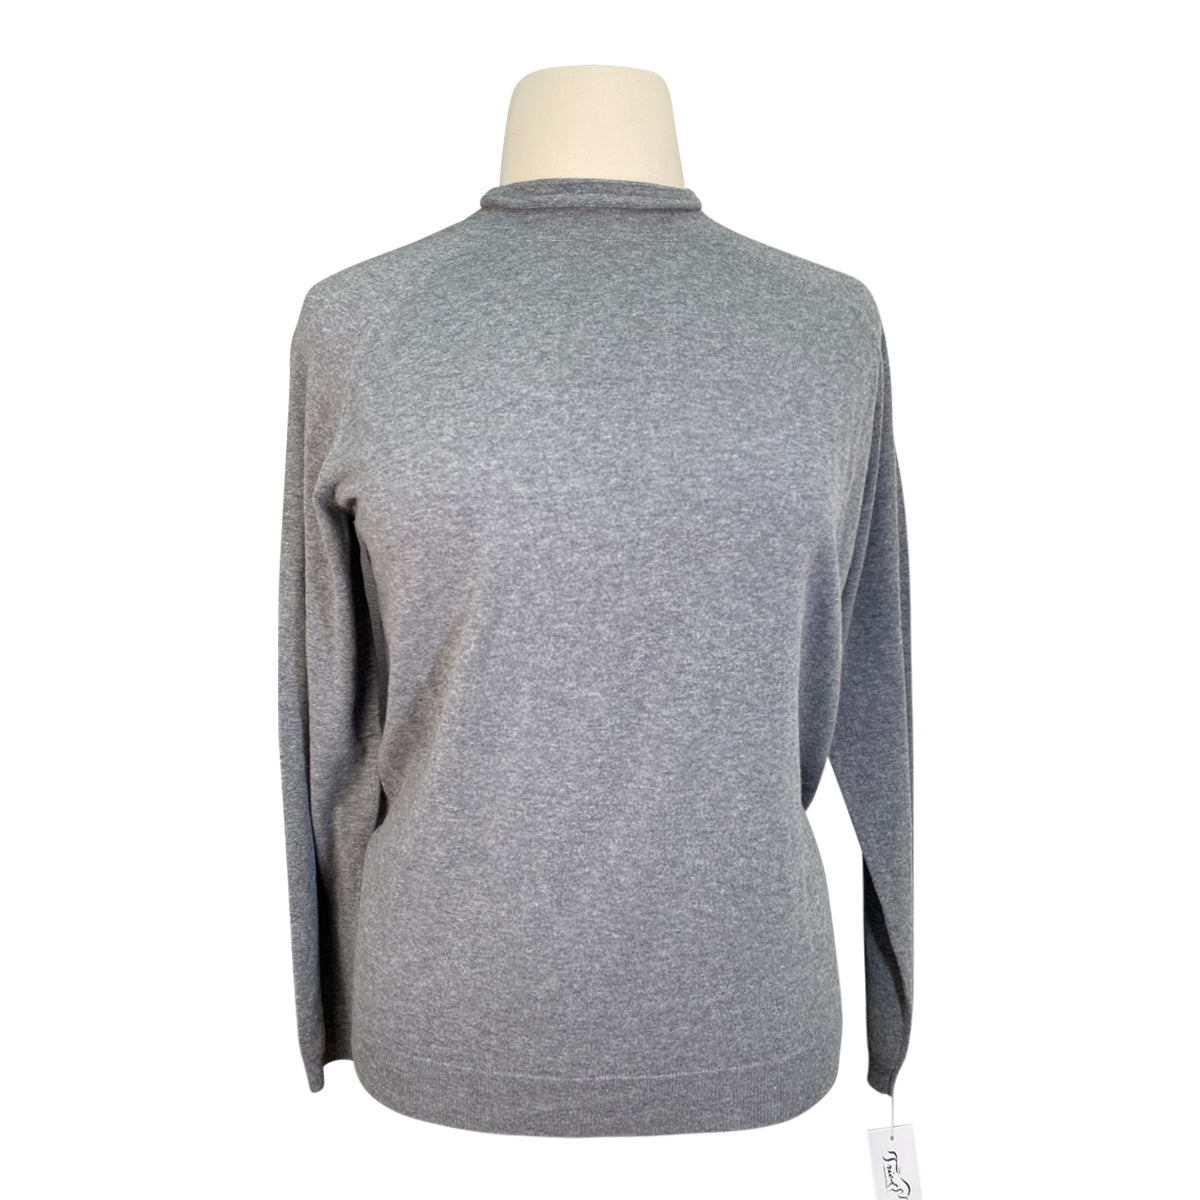 Callidae 'The Lightweight Mock' L/S Shirt in Pewter